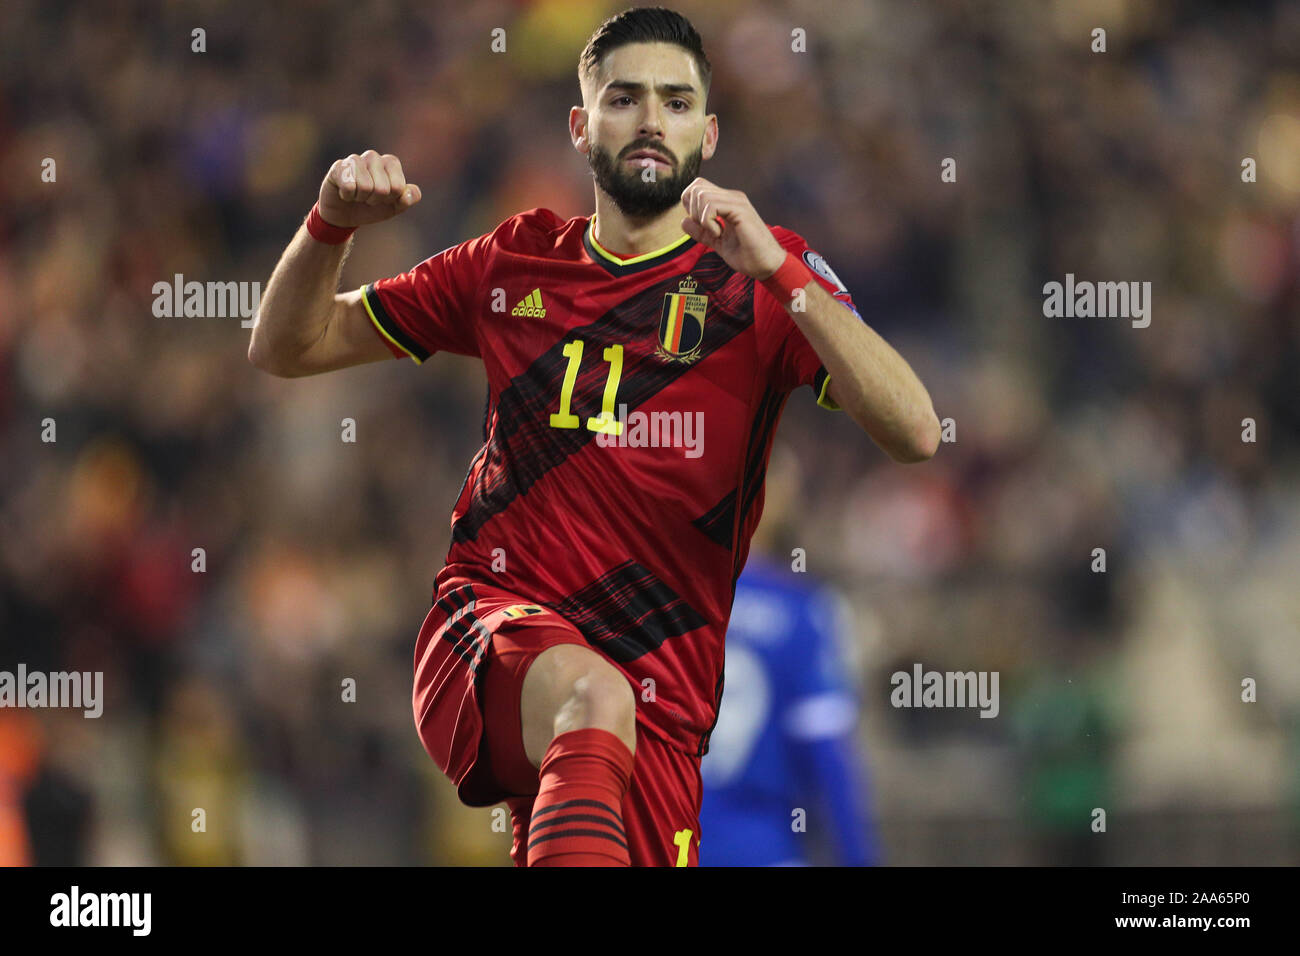 Brussels, Belgium. 19th Nov, 2019. Yannick Carrasco of Belgium celebrates during a UEFA Euro 2020 group I qualifying match between Belgium and Cyprus in Brussels, Belgium, Nov. 19, 2019. Credit: Zheng Huansong/Xinhua/Alamy Live News Stock Photo